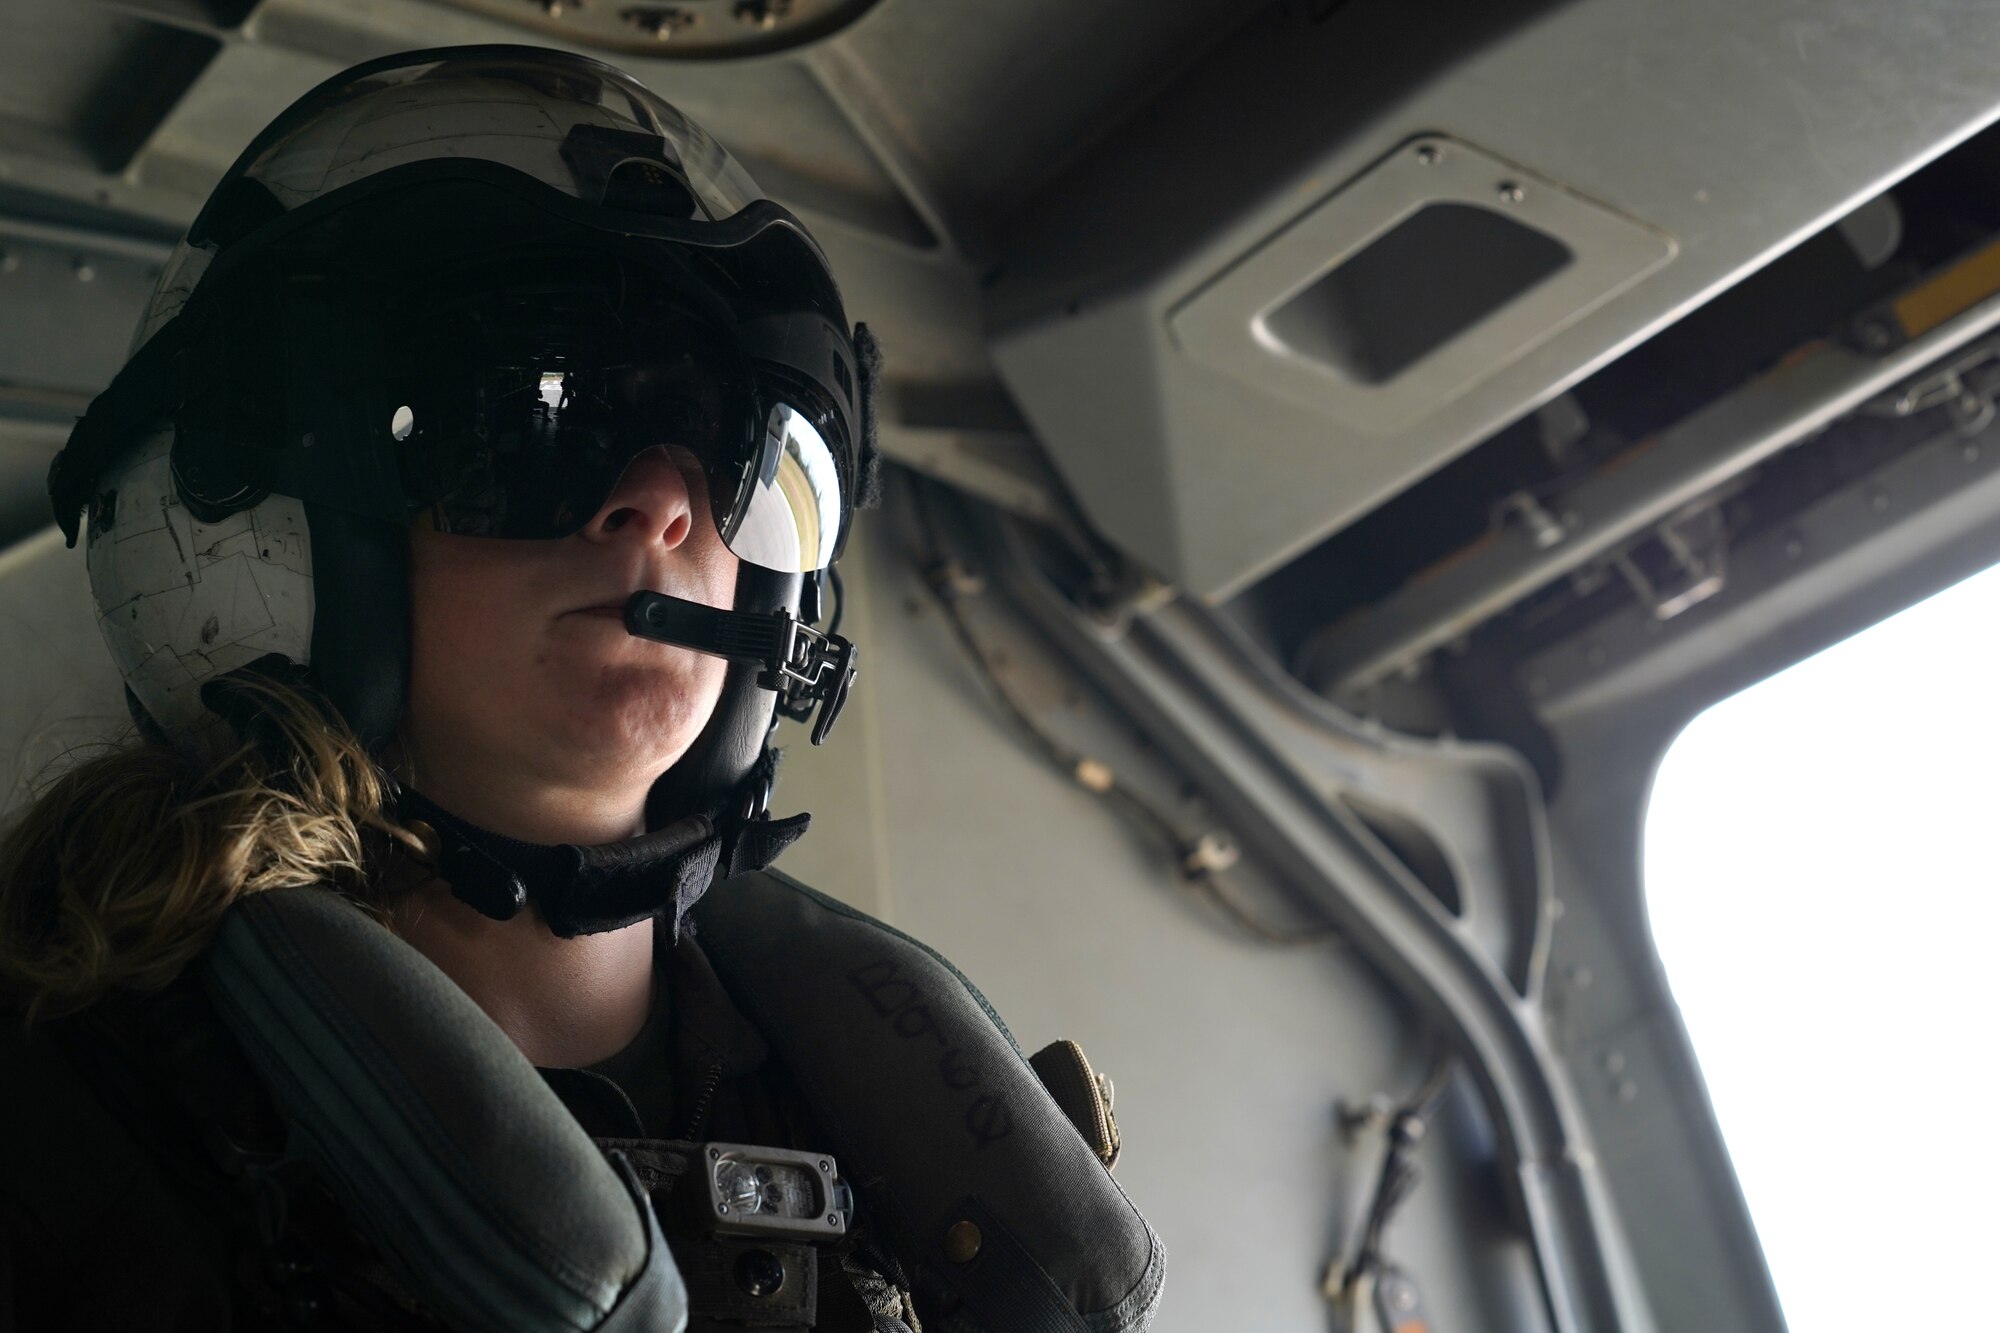 U.S. Marine Corps Sgt. Stephanie Fregoe, VMM-774 MV-22B Osprey crew chief, Naval Air Station Norfolk, Virginia, rides in an Osprey flying over Gulfport, Mississippi, Oct. 23, 2020. Marines came to Keesler to conduct routine training operations in and around the Mississippi area. (U.S. Air Force photo by Airman 1st Class Seth Haddix)